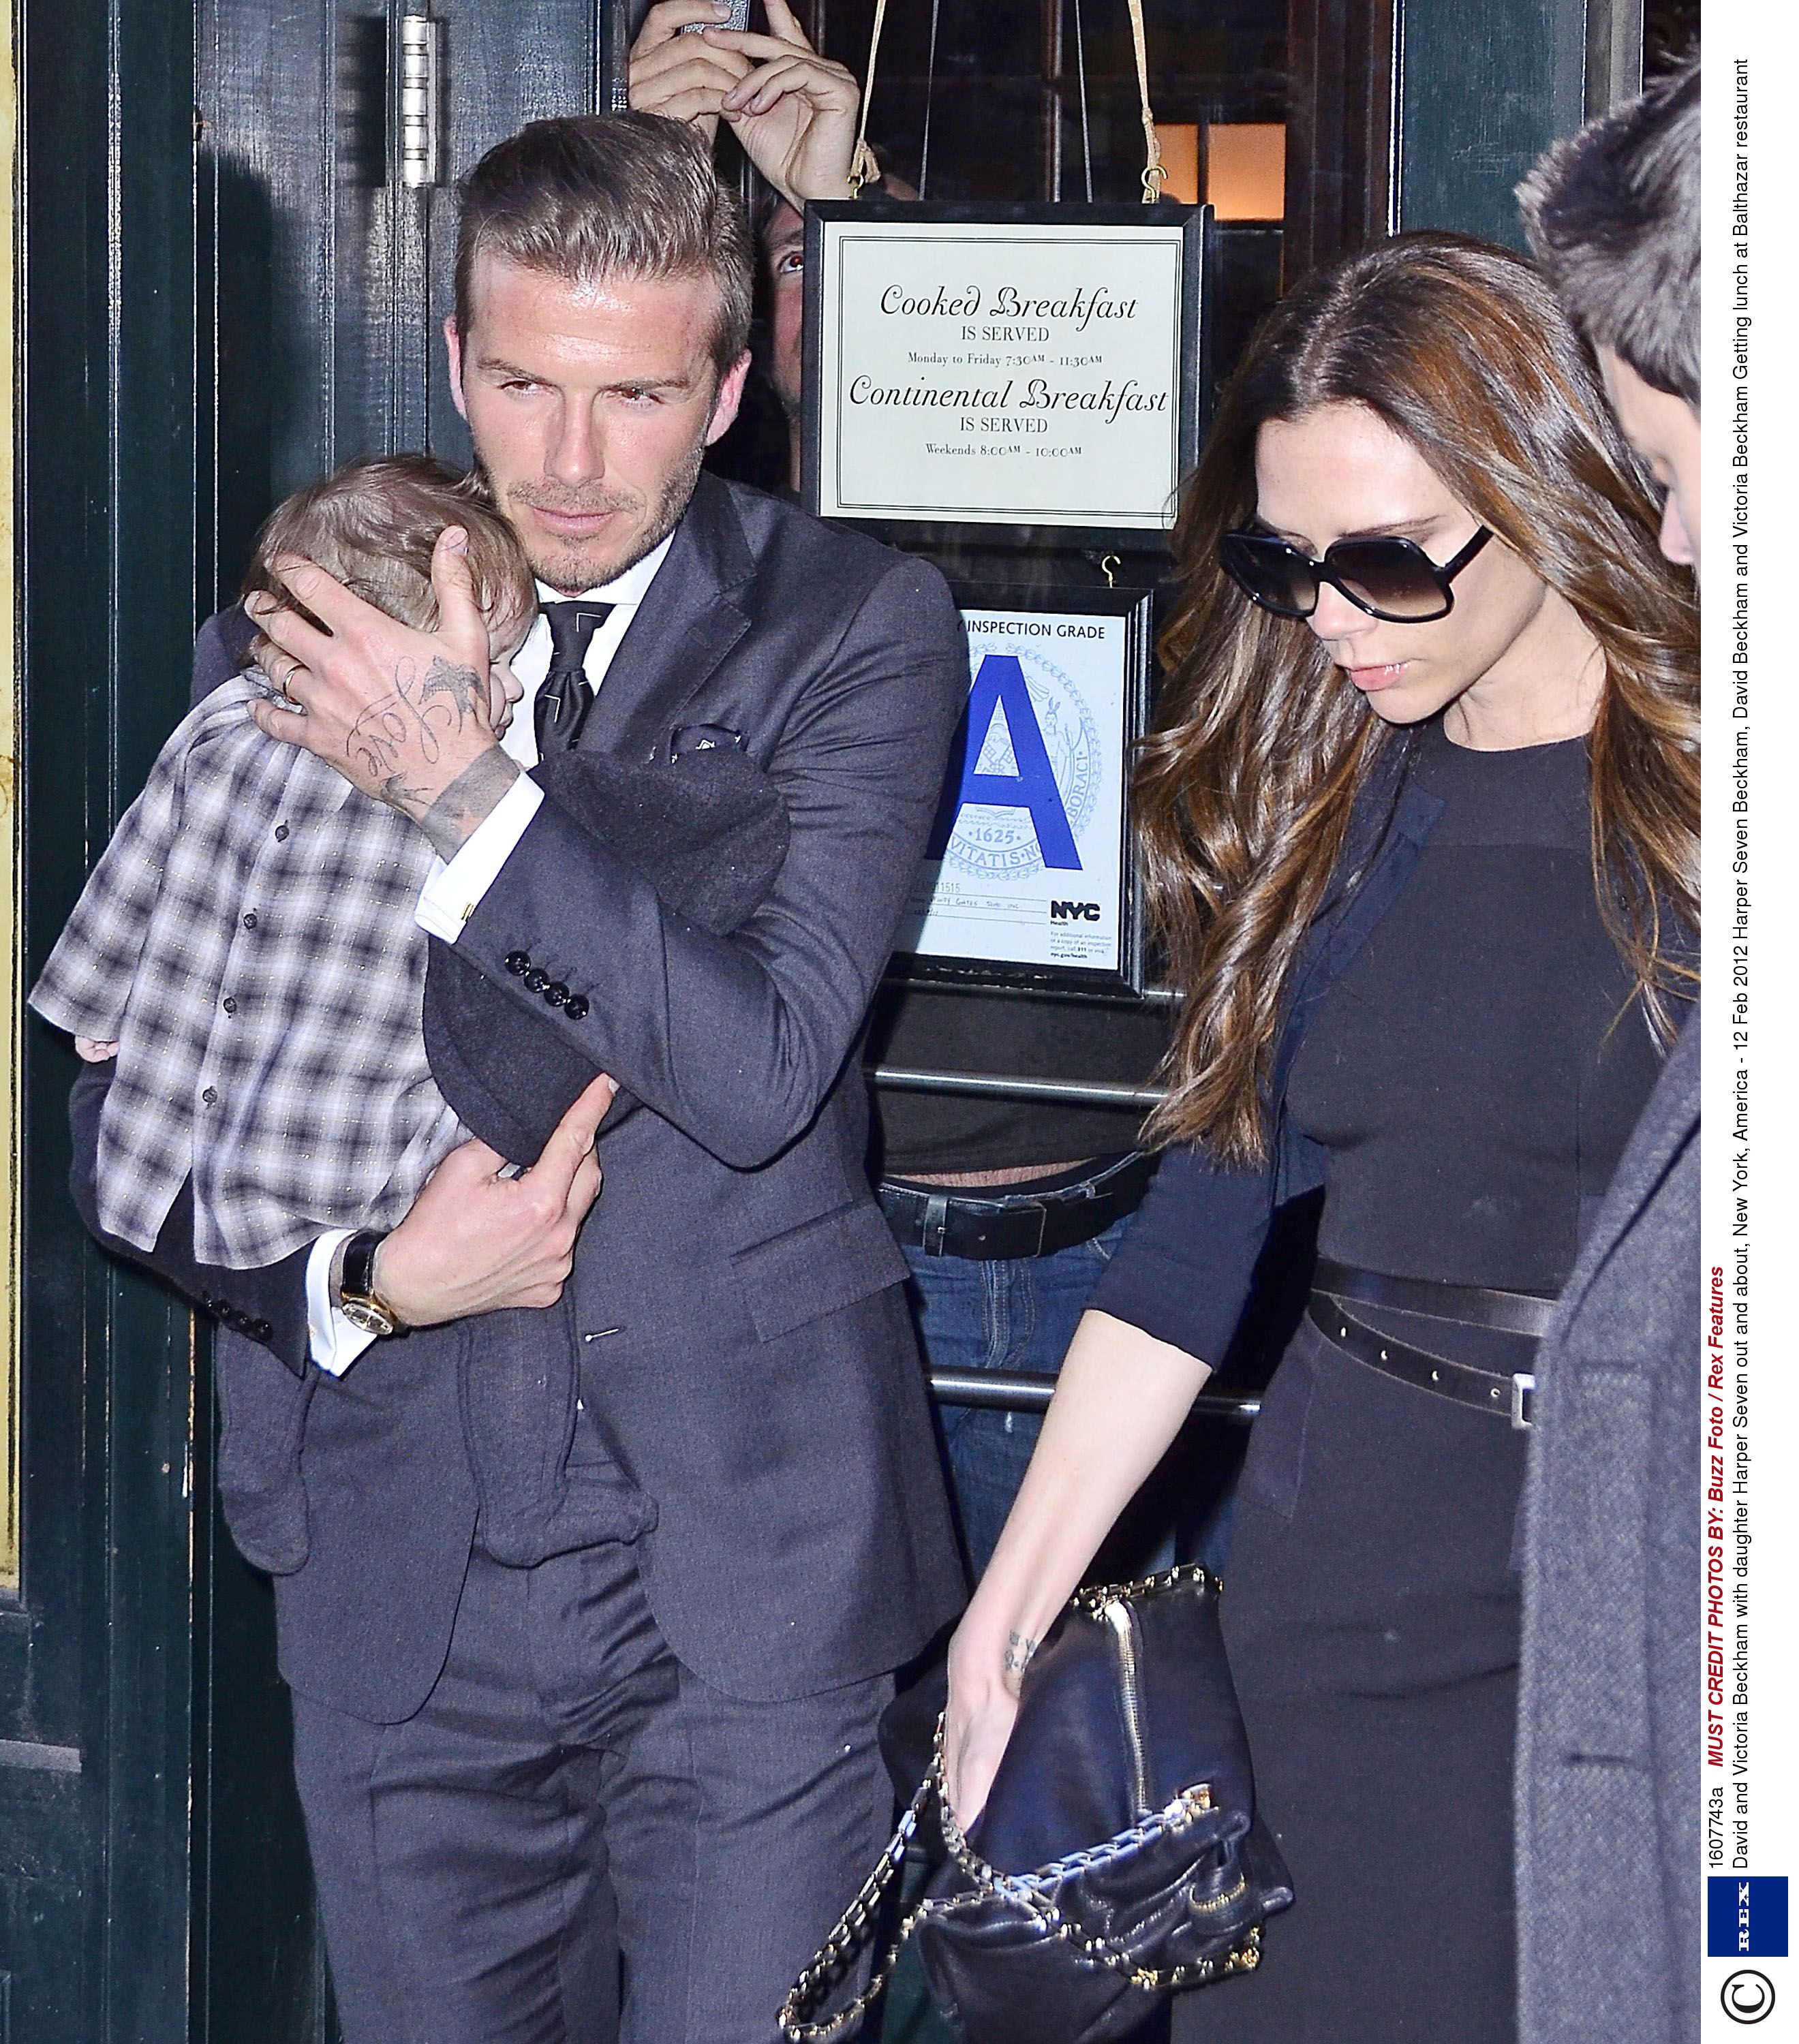 Victoria Beckham steps out with husband David in NYC